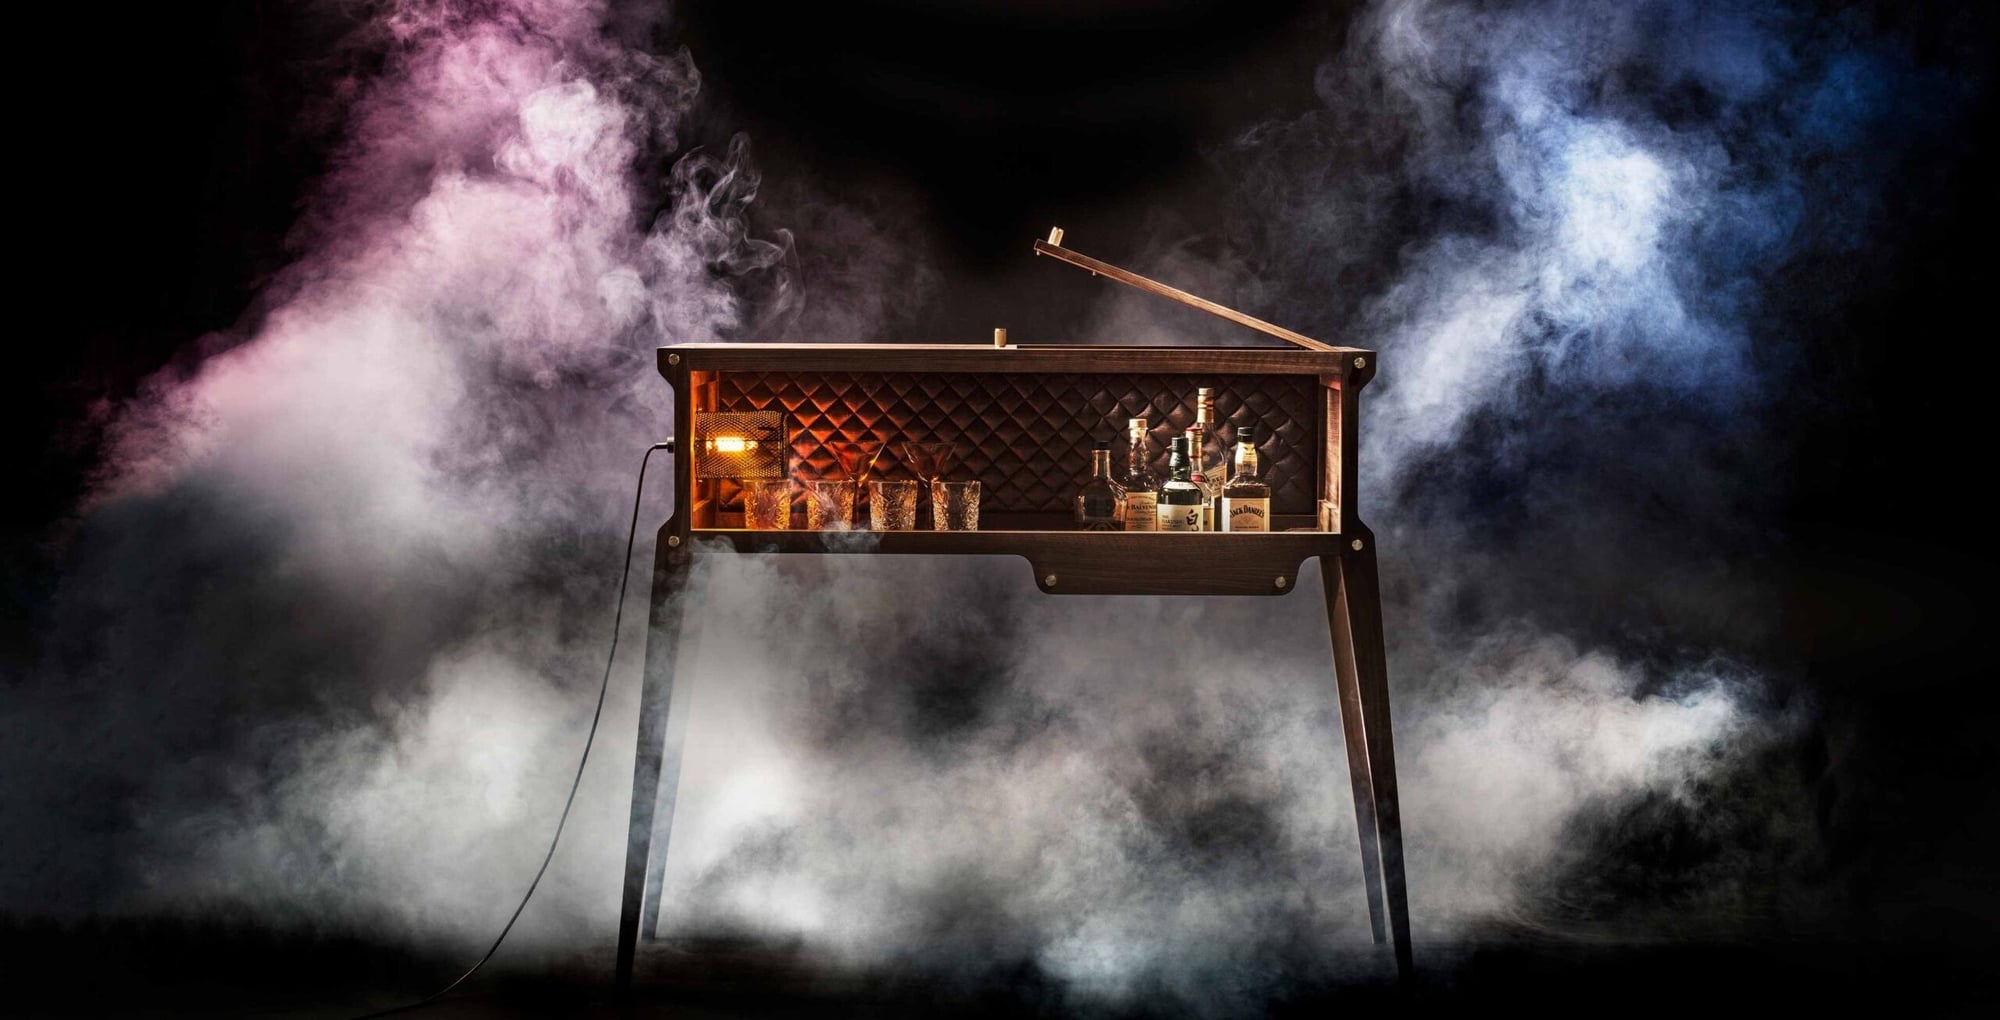 Stylish Rockstar Bar designed by Buster + Punch in collaboration with Harrod's.